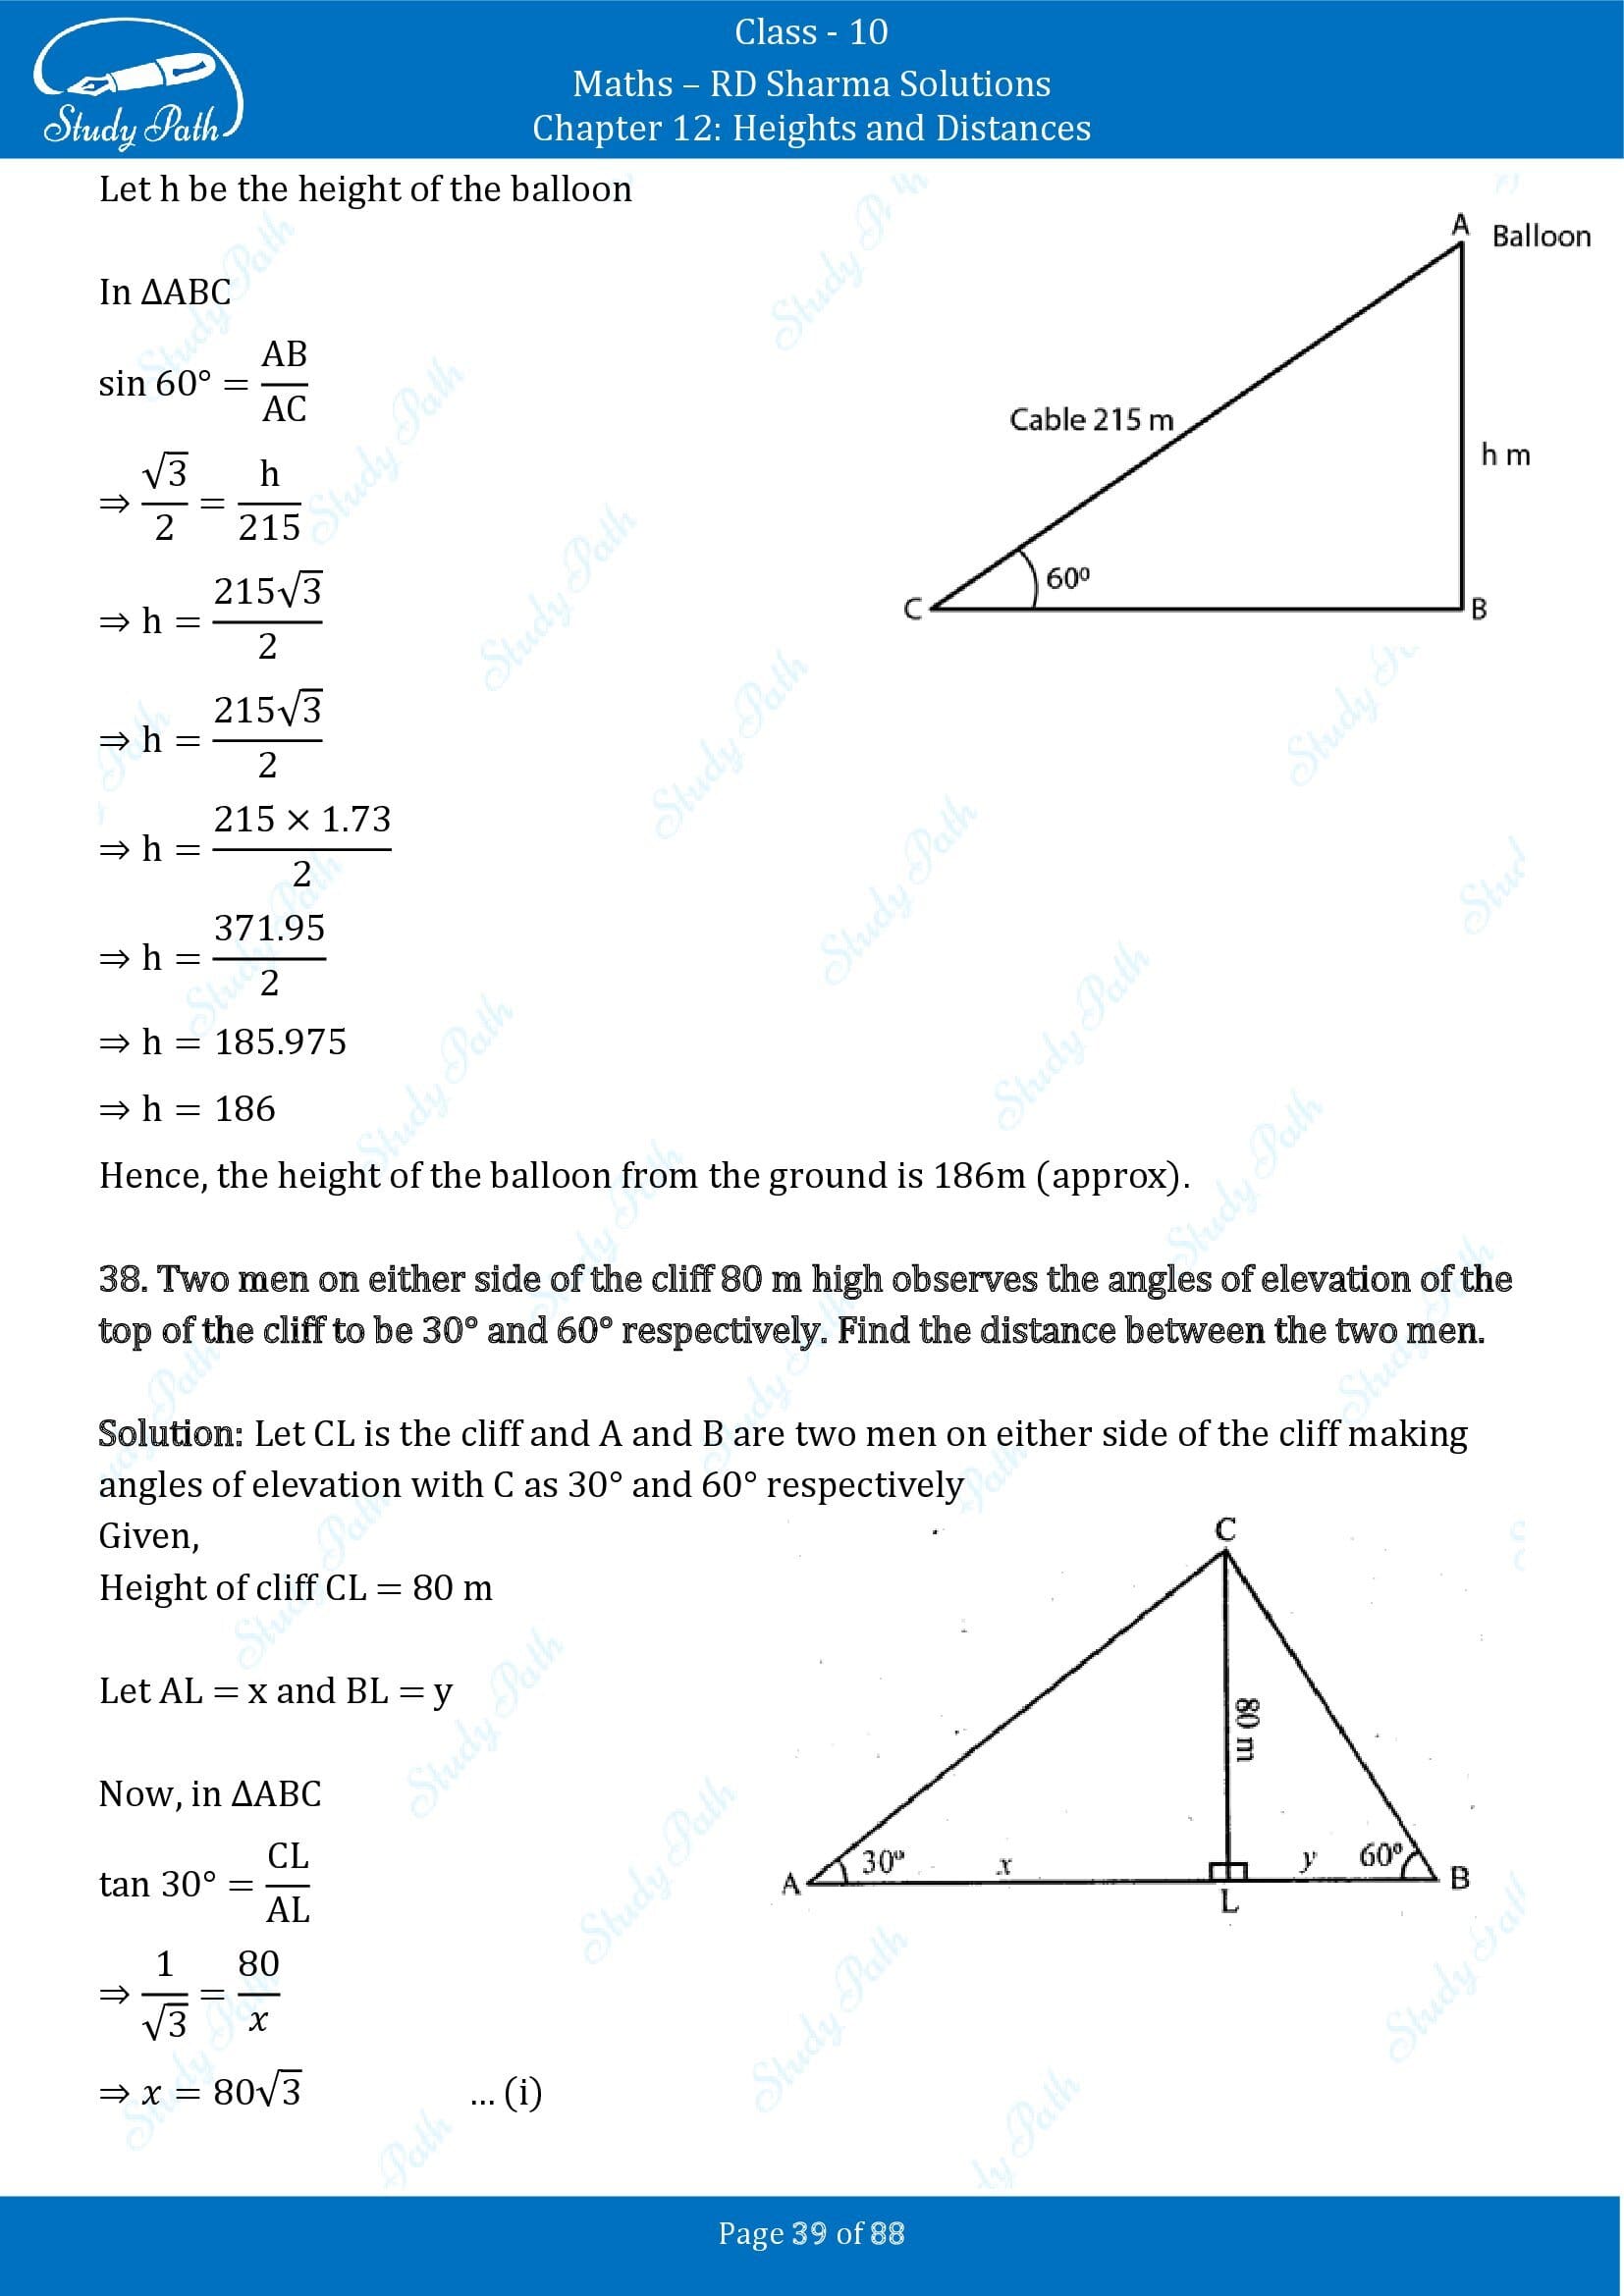 RD Sharma Solutions Class 10 Chapter 12 Heights and Distances Exercise 12.1 00039